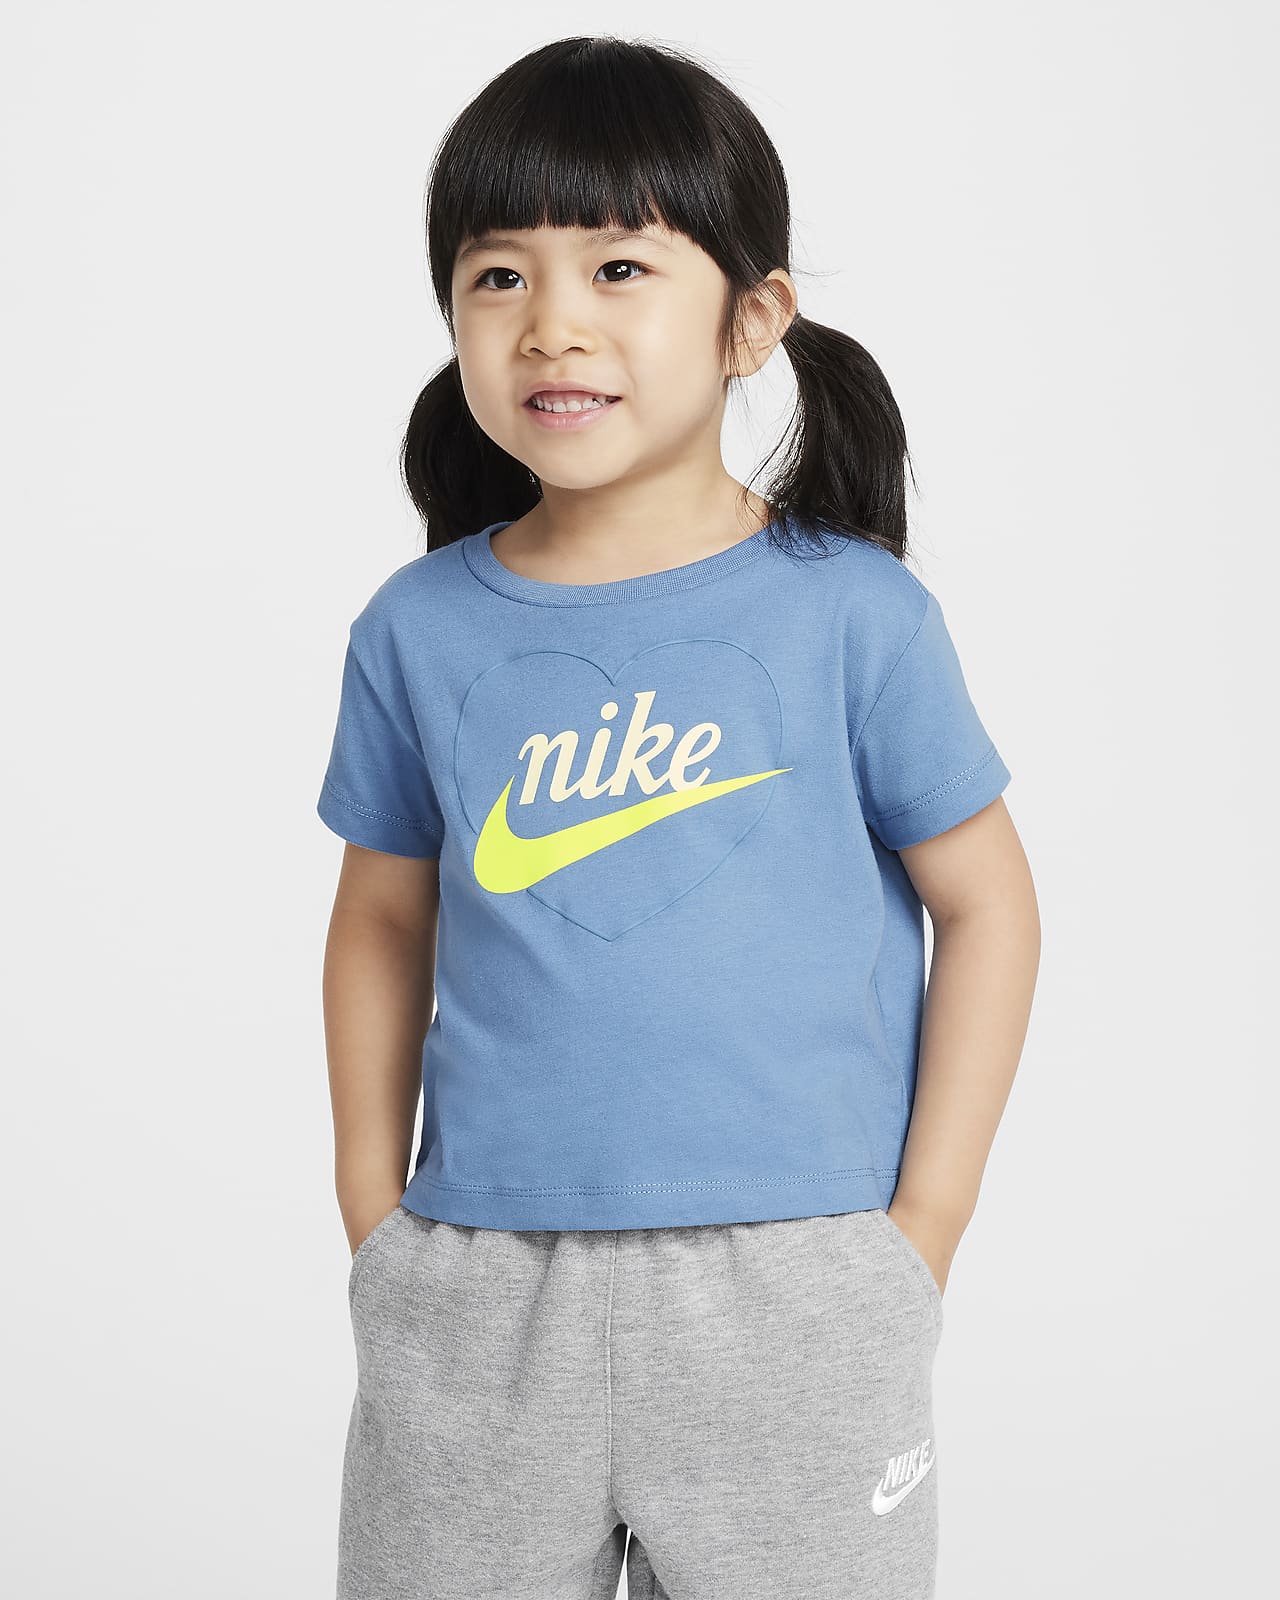 Nike New Impressions Toddler Heart Graphic T-Shirt